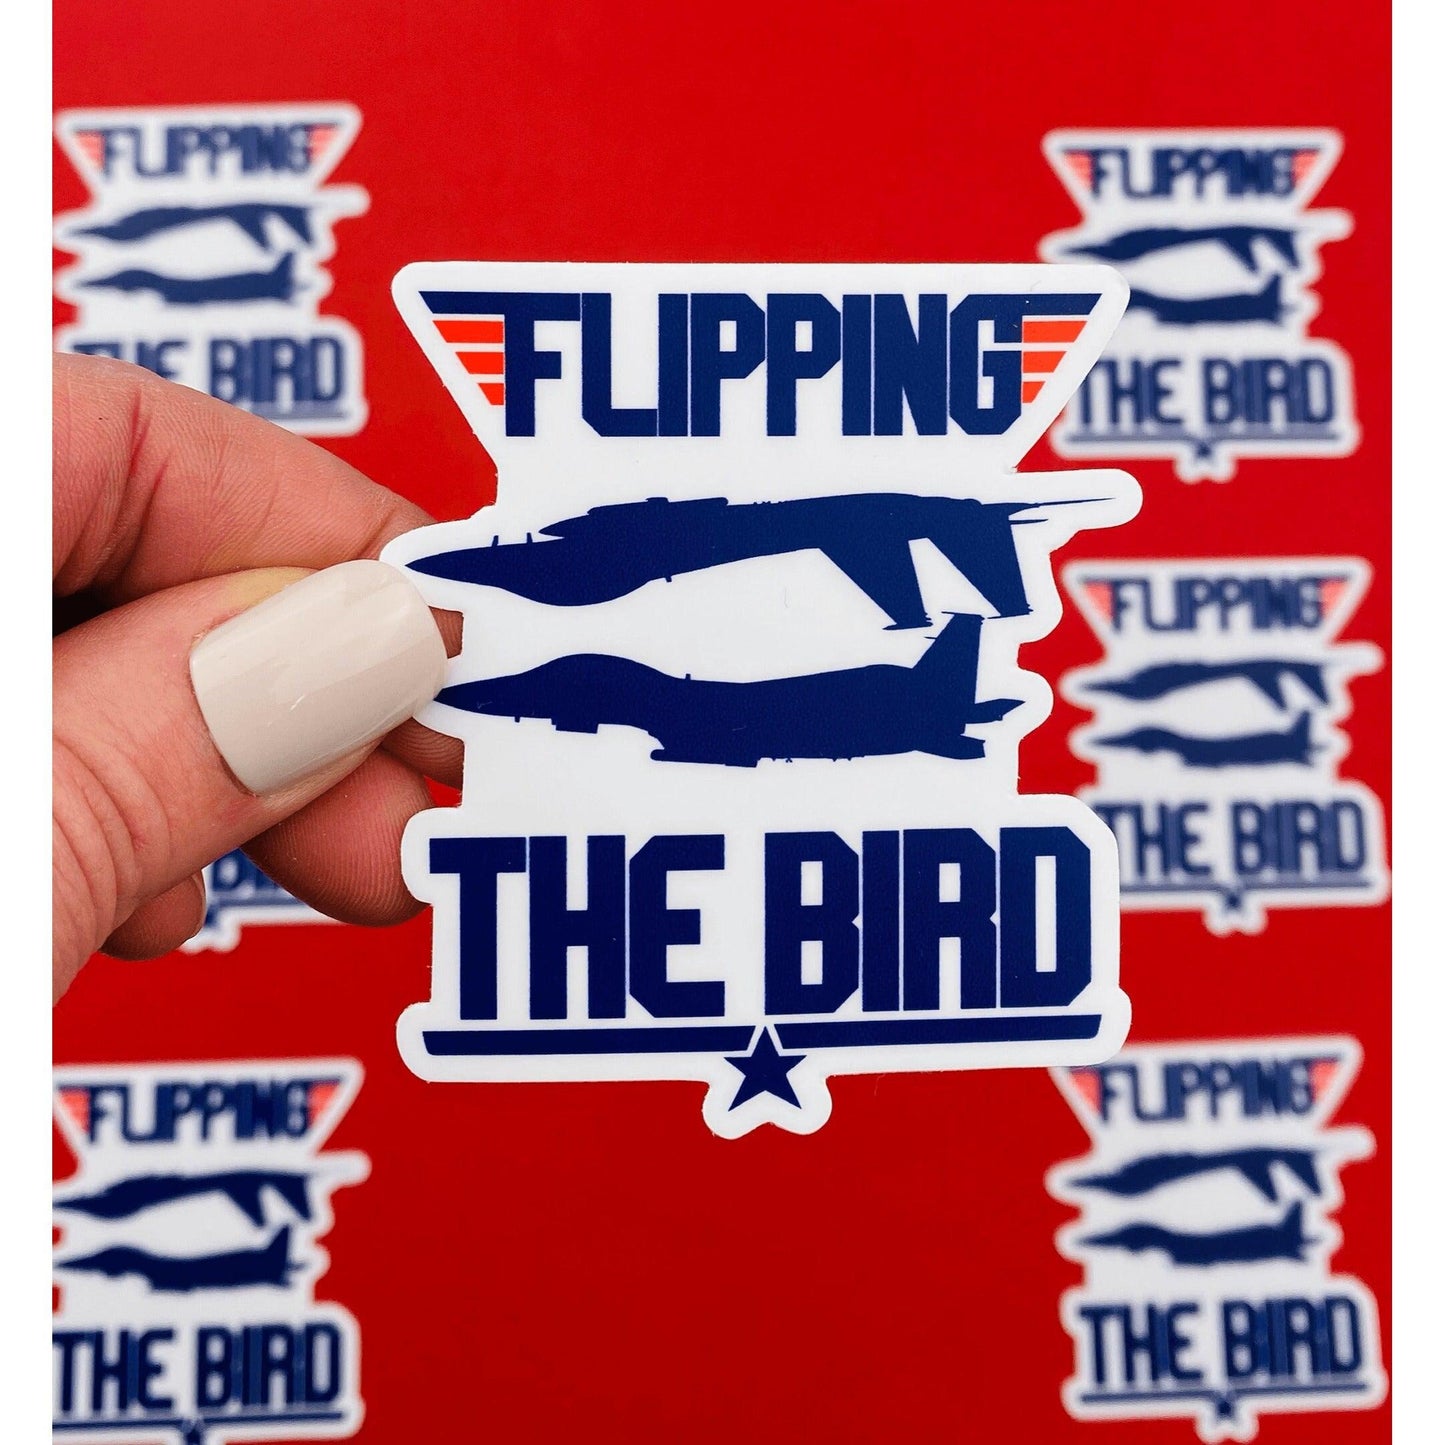 Funny Aviation Sticker - Flipping the Bird Sticker for Pilots, Jet, Aviator, Military Pilot, Air Force - Ottos Grotto :: Stickers For Your Stuff